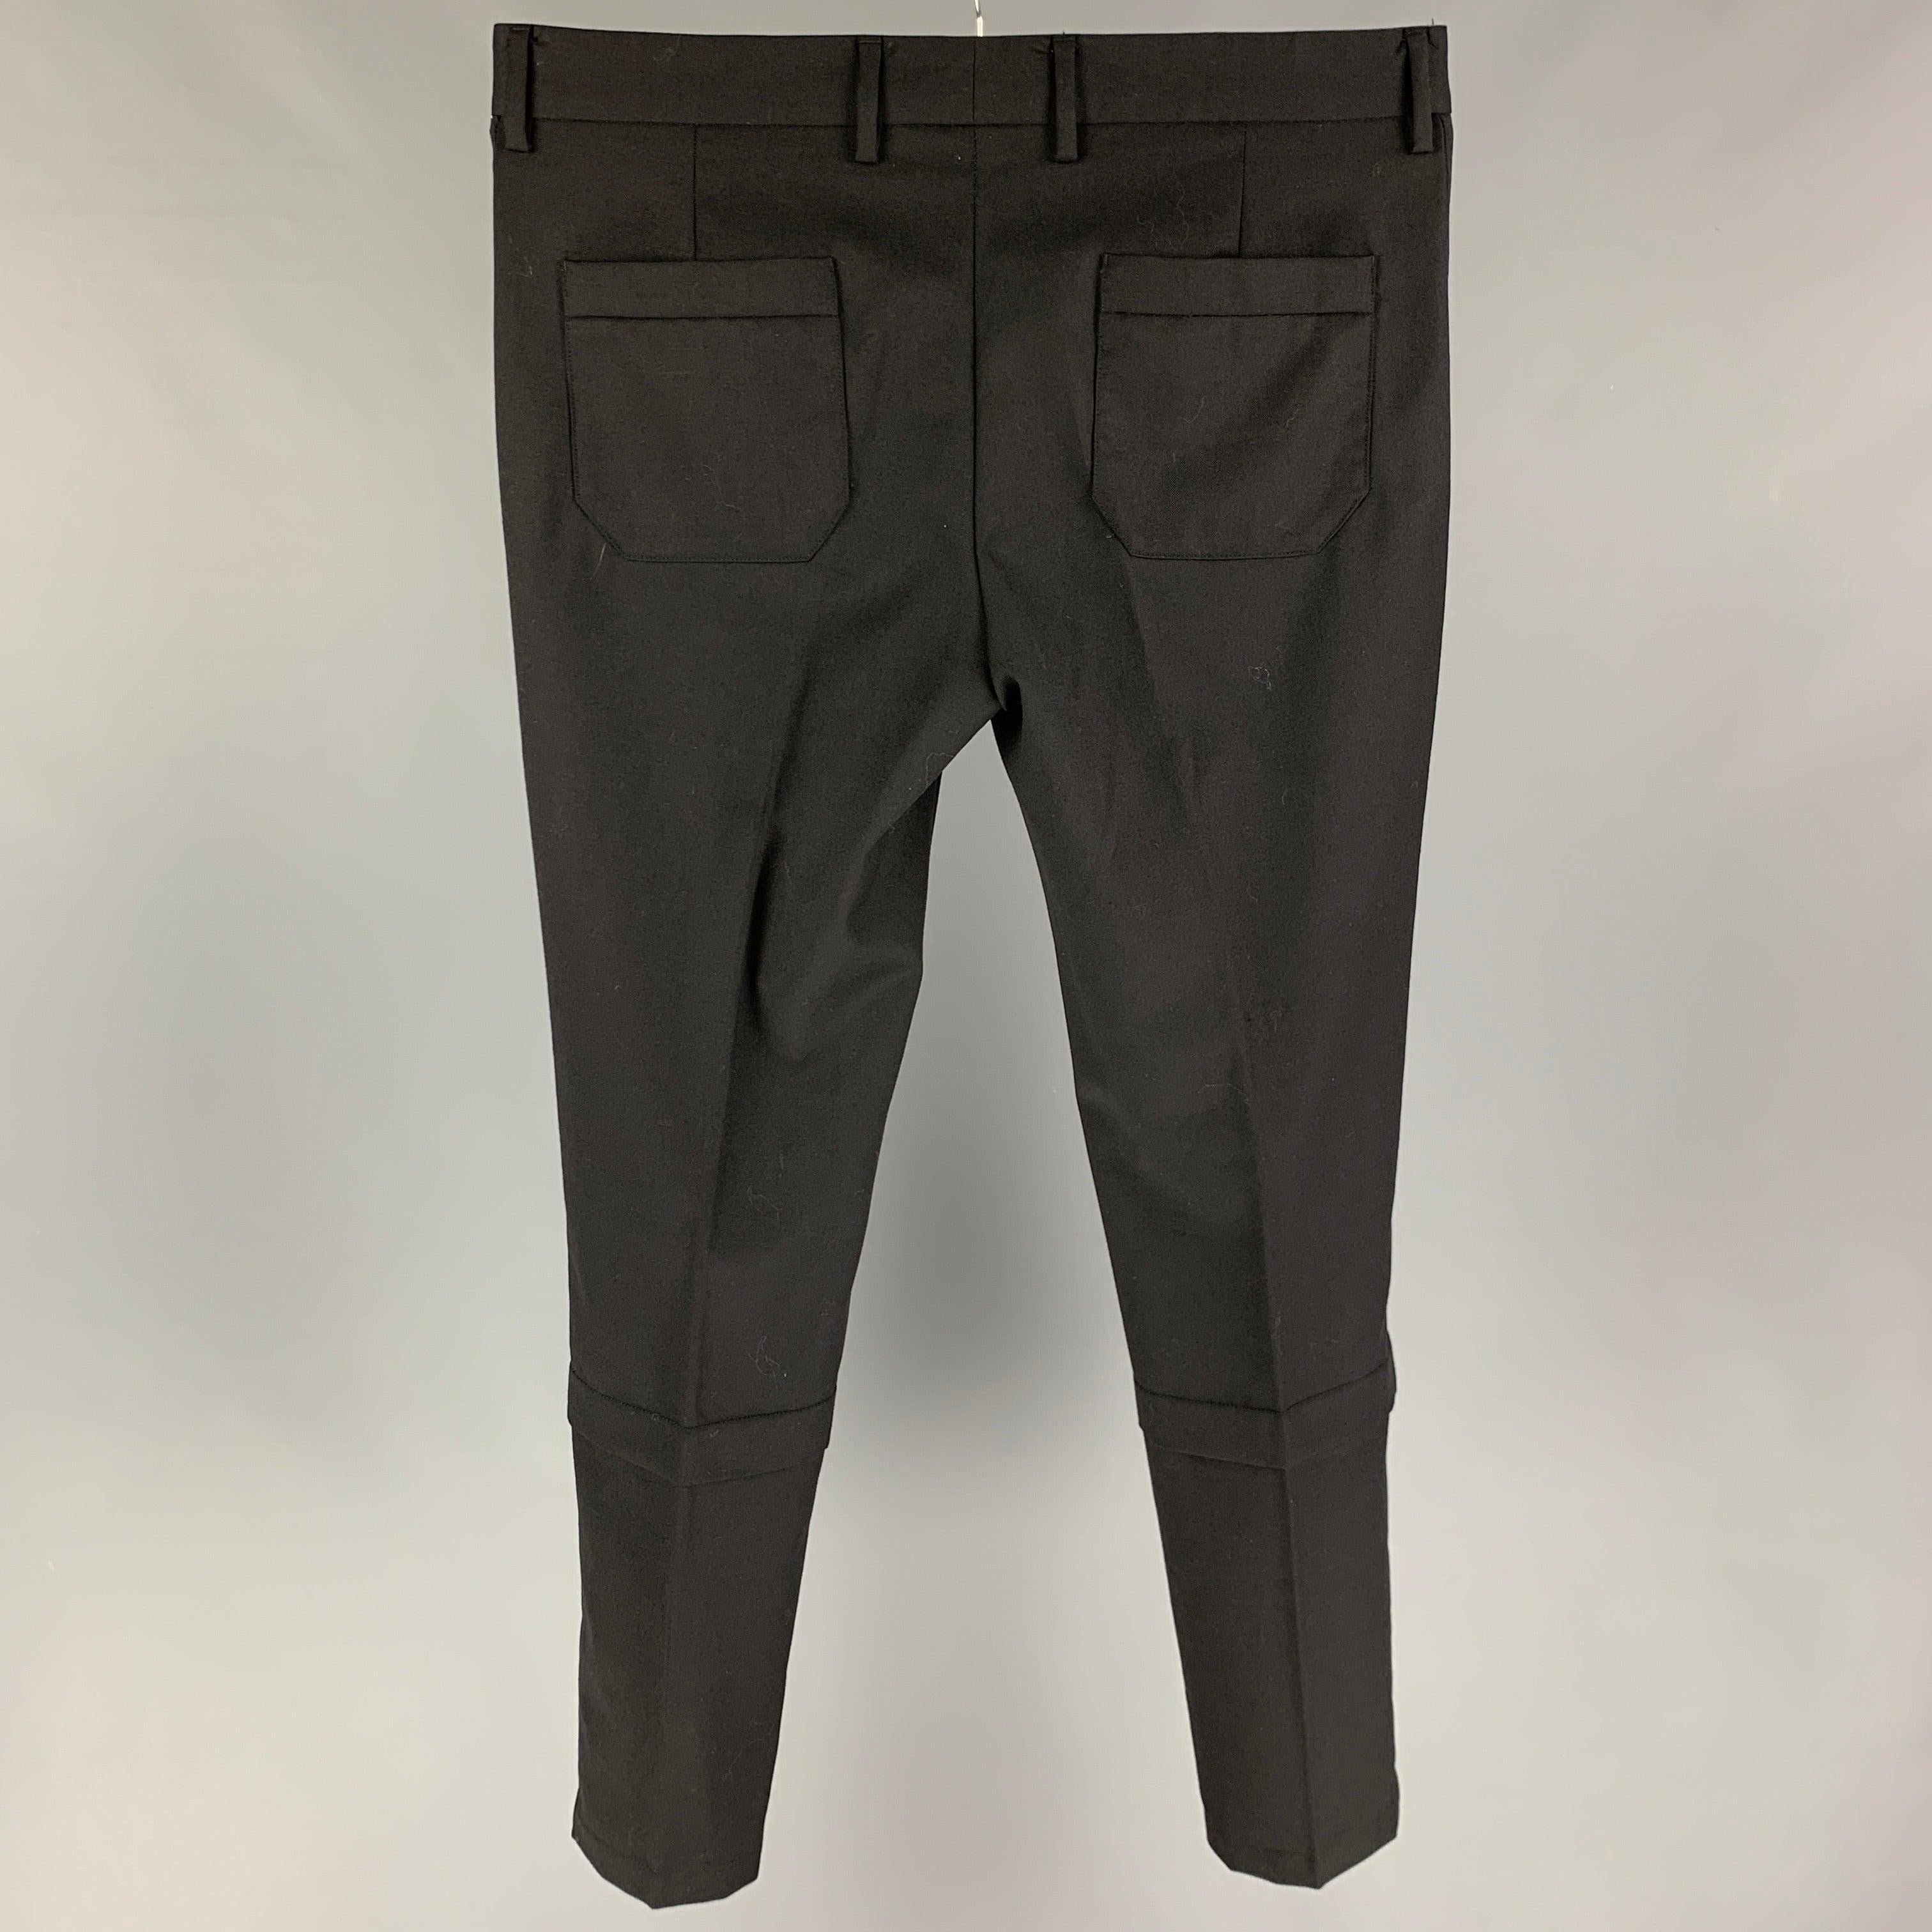 VIKTOR & ROLF pants comes in a black wool featuring a slim fit, front tab, and a zip fly closure. Made in Italy.
Very Good
Pre-Owned Condition. 

Marked:   50 

Measurements: 
  Waist: 34 inches  Rise: 9.5 inches  Inseam: 32 inches 
  
  
